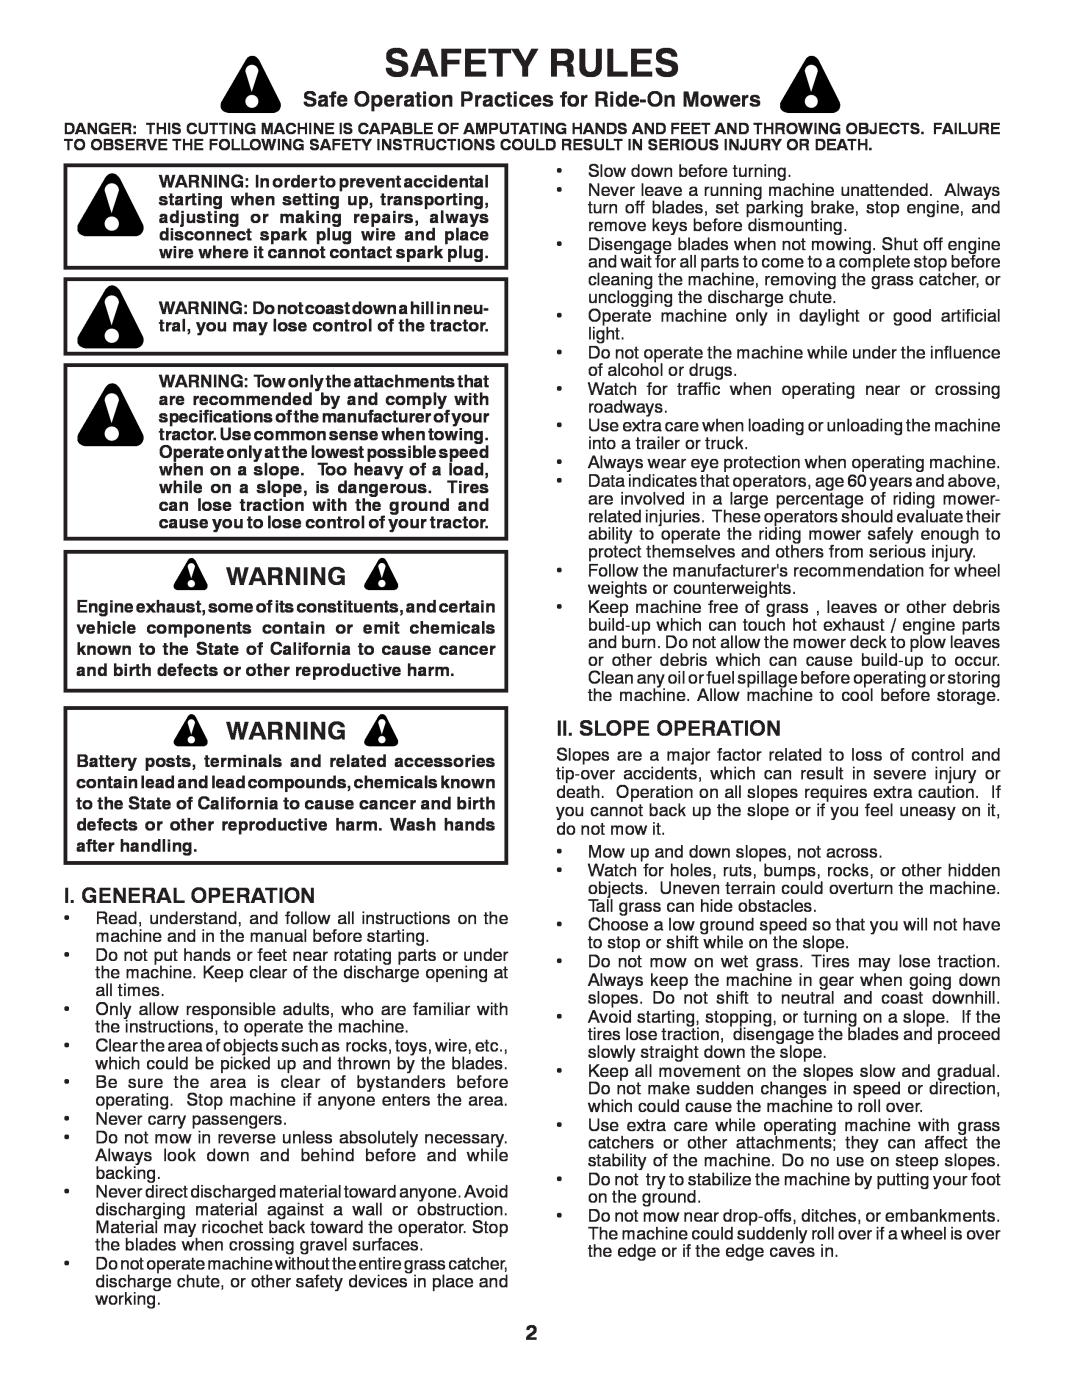 Poulan 85-50 manual Safety Rules, Safe Operation Practices for Ride-On Mowers, I. General Operation, Ii. Slope Operation 